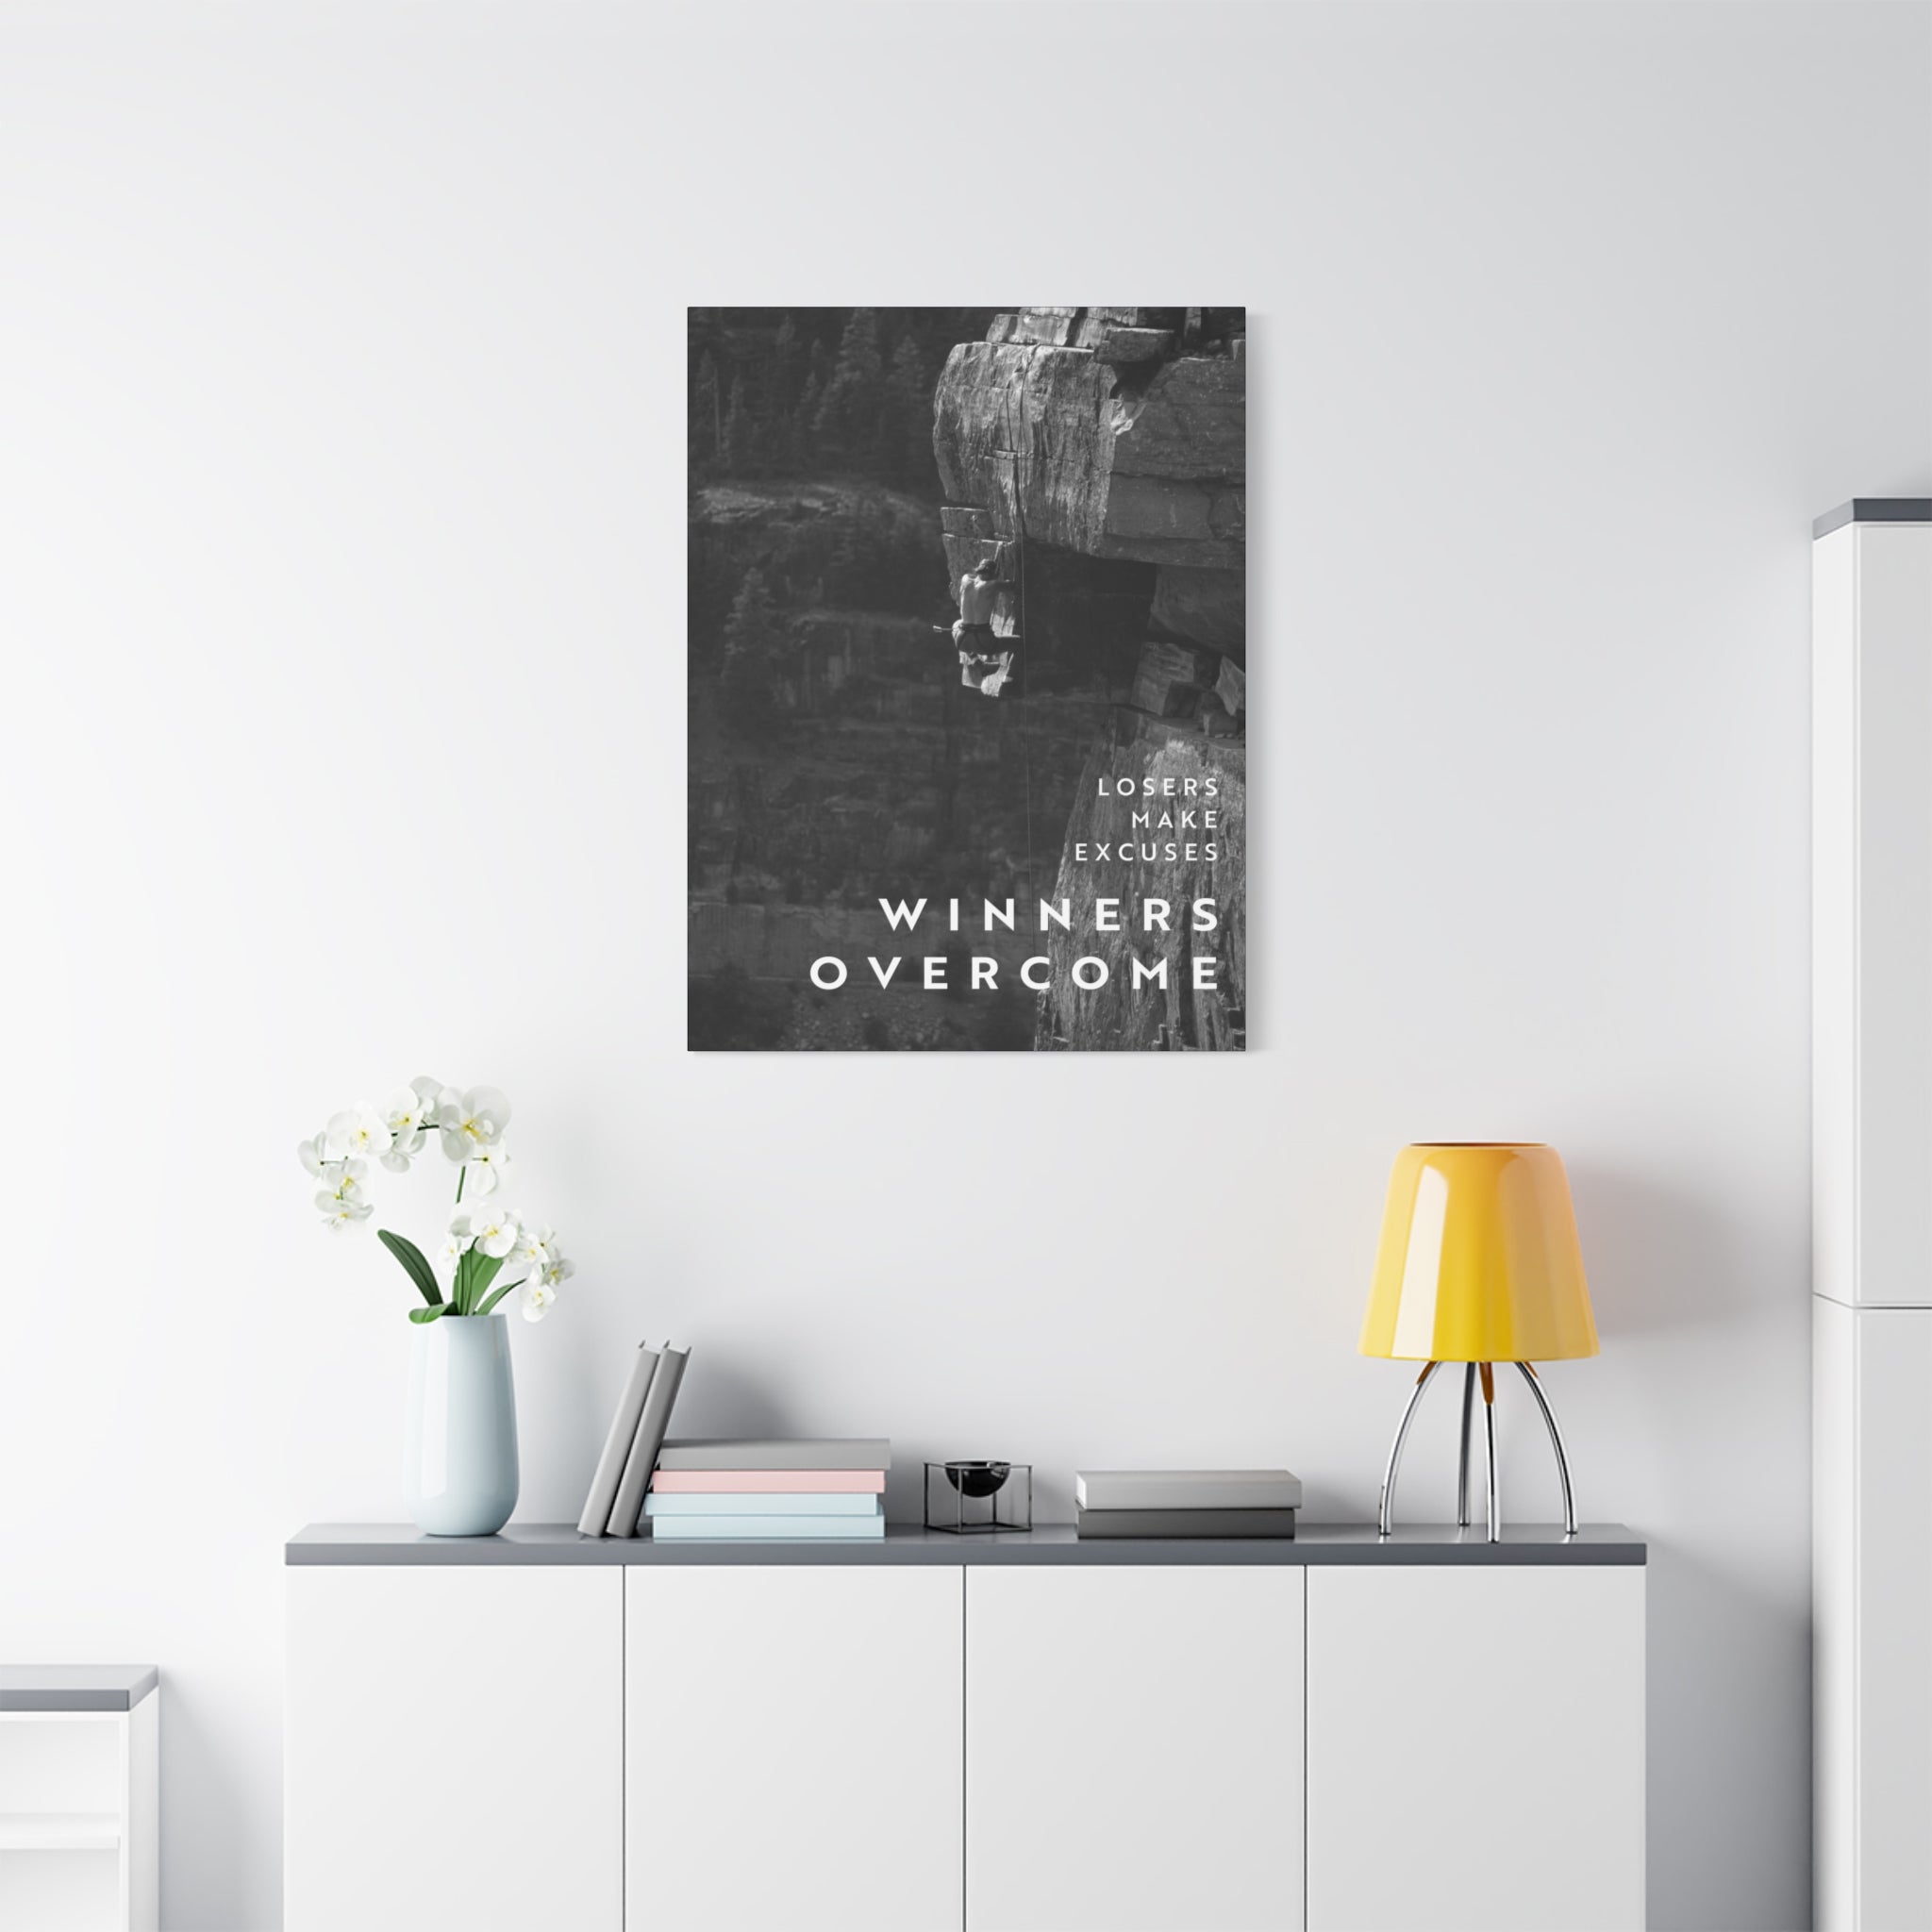 Winners Overcome - Black And White - Wall Art additional image 3